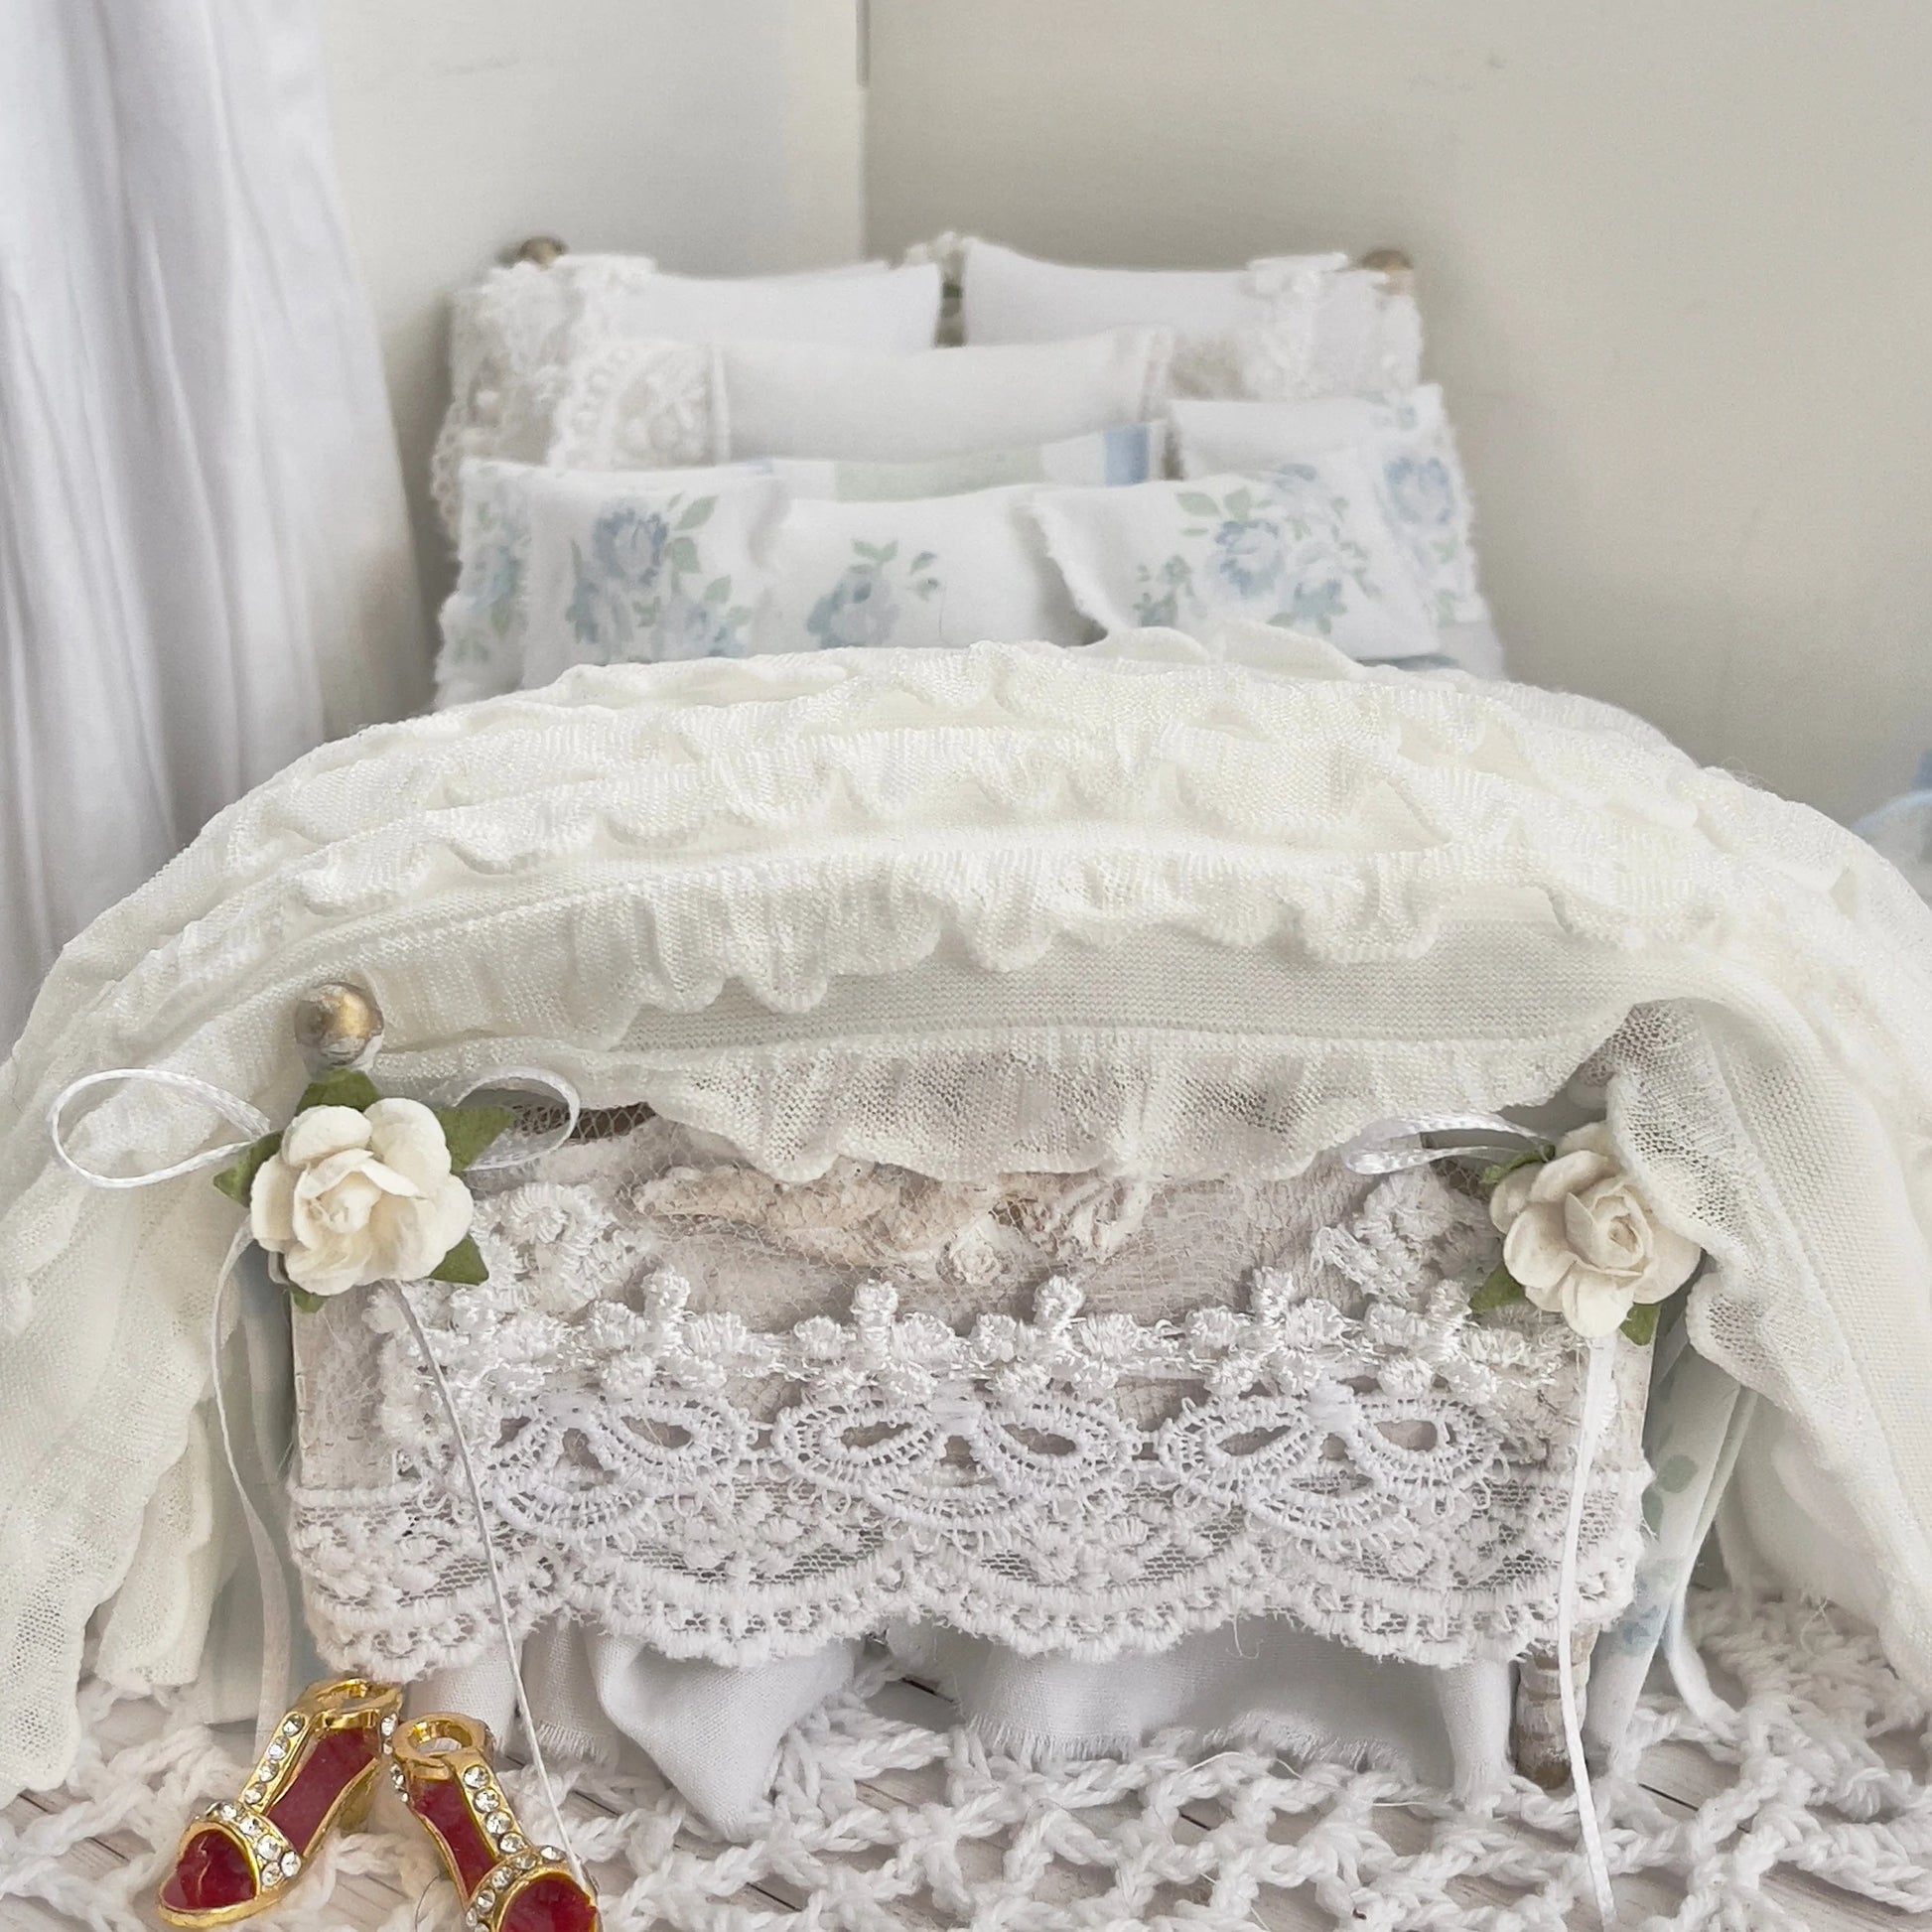 Chantallena Doll House Dressed Bed | Fifteen Piece White Cotton with Grand Pink Roses, Lace Accents, Ruffled Knit Throw | Grand Roses